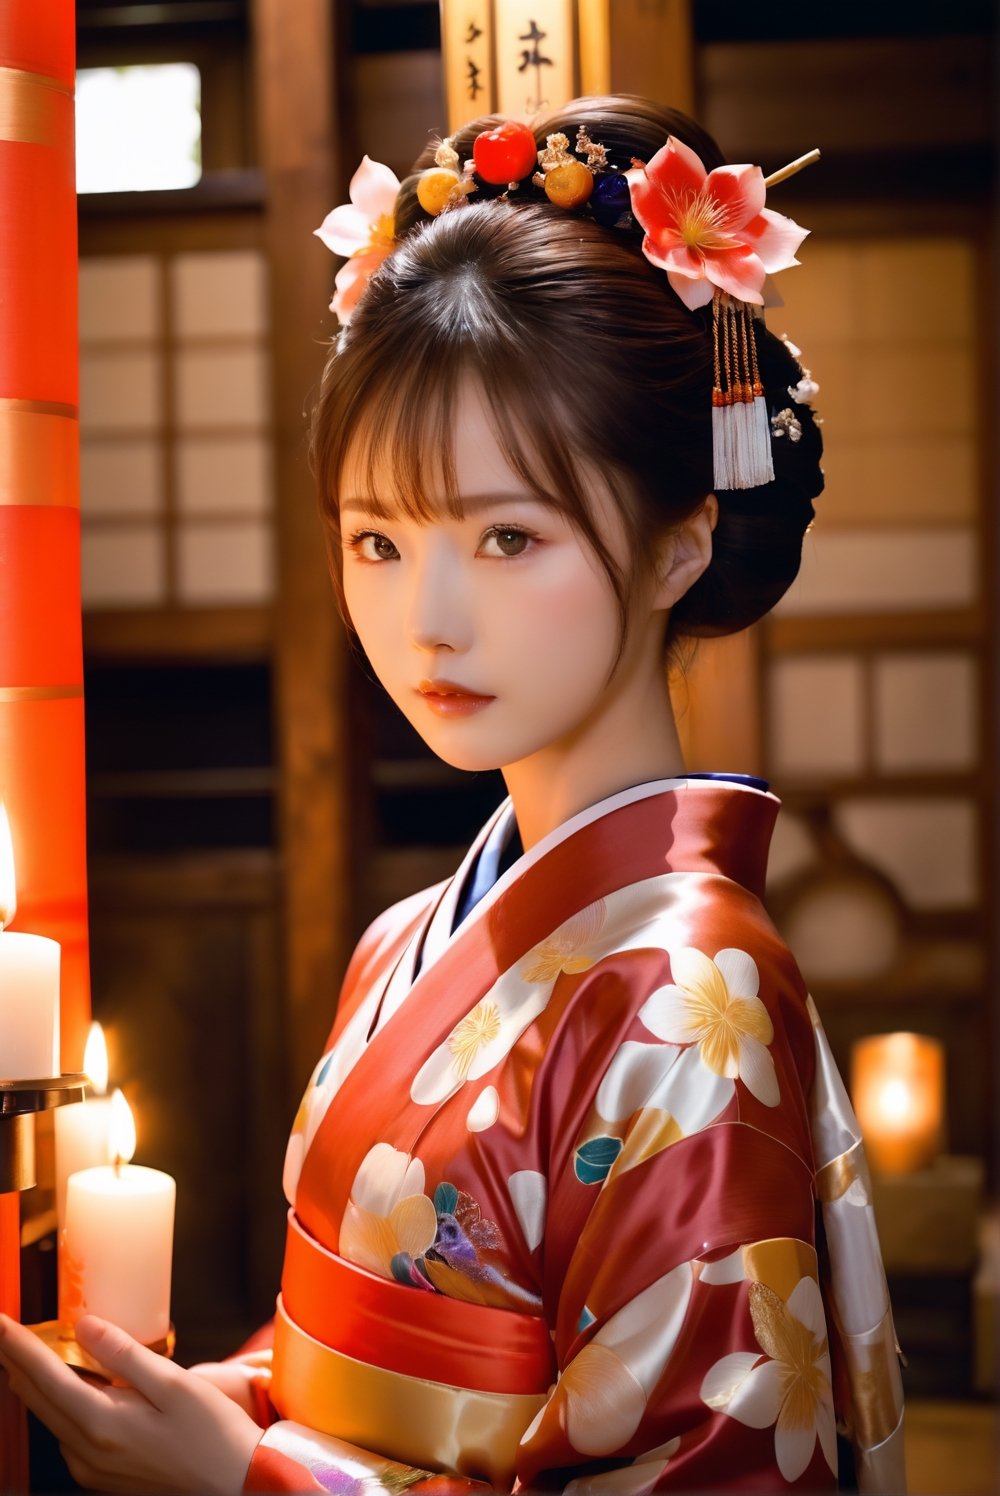 award-winning photography, furisode, ichika, hyperrealism, bright and expressive eyes, ichika attends hatsumode, sincerely worshiping, light and natural makeup, in a solemn shrine, surrounded by sacred magic power, hasselbald 503CW, fujifilm velvia 100, holy light on ichika, decorated with candles